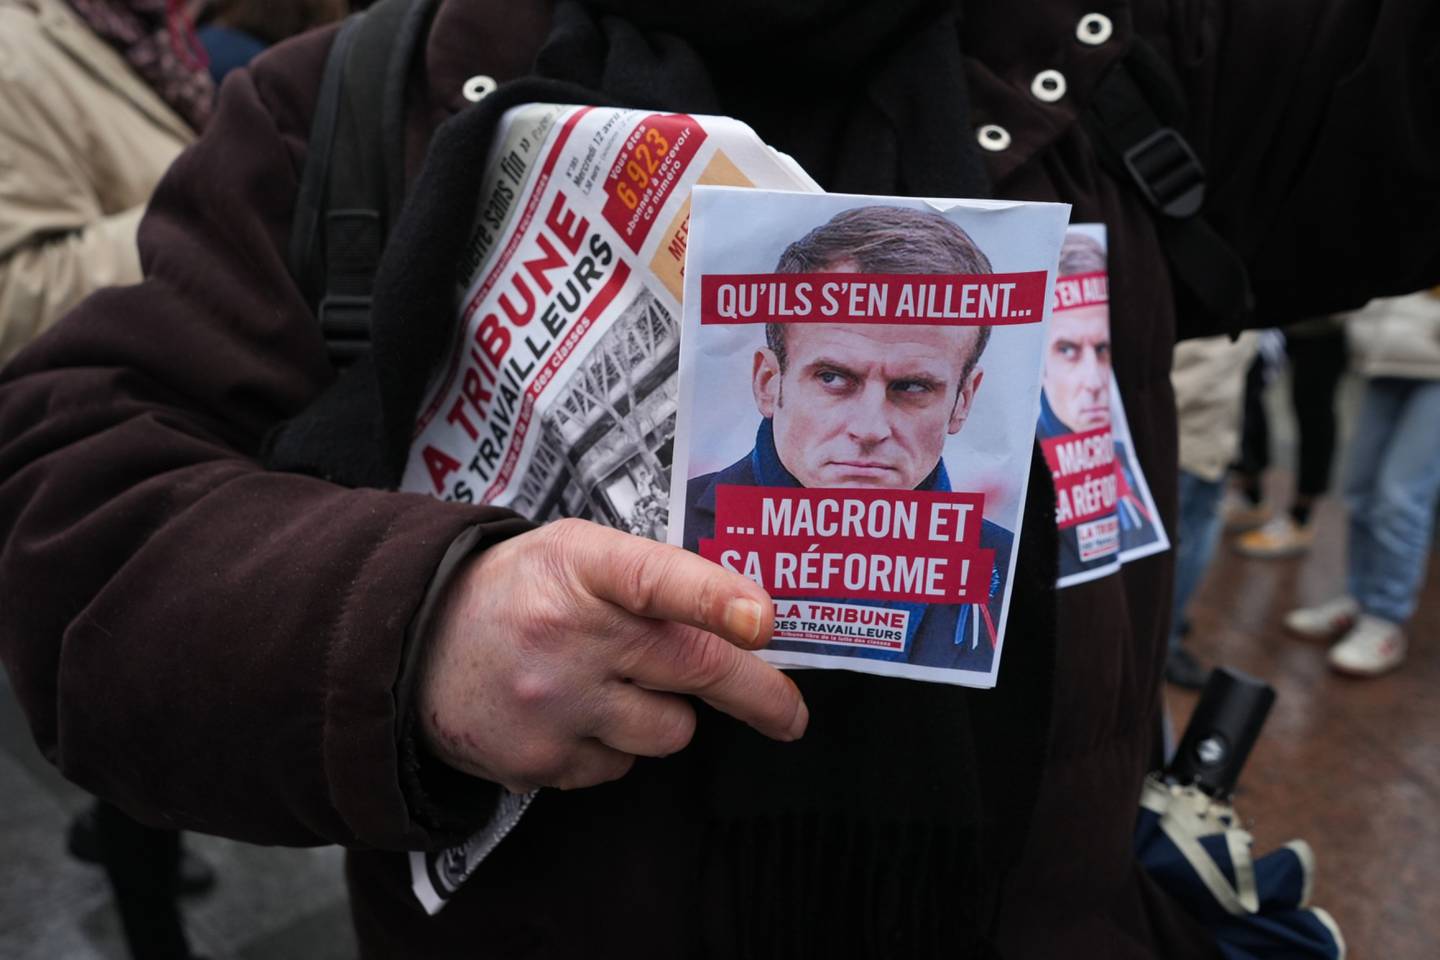 A protestor holds a poster during a demonstration in Paris on April 14.